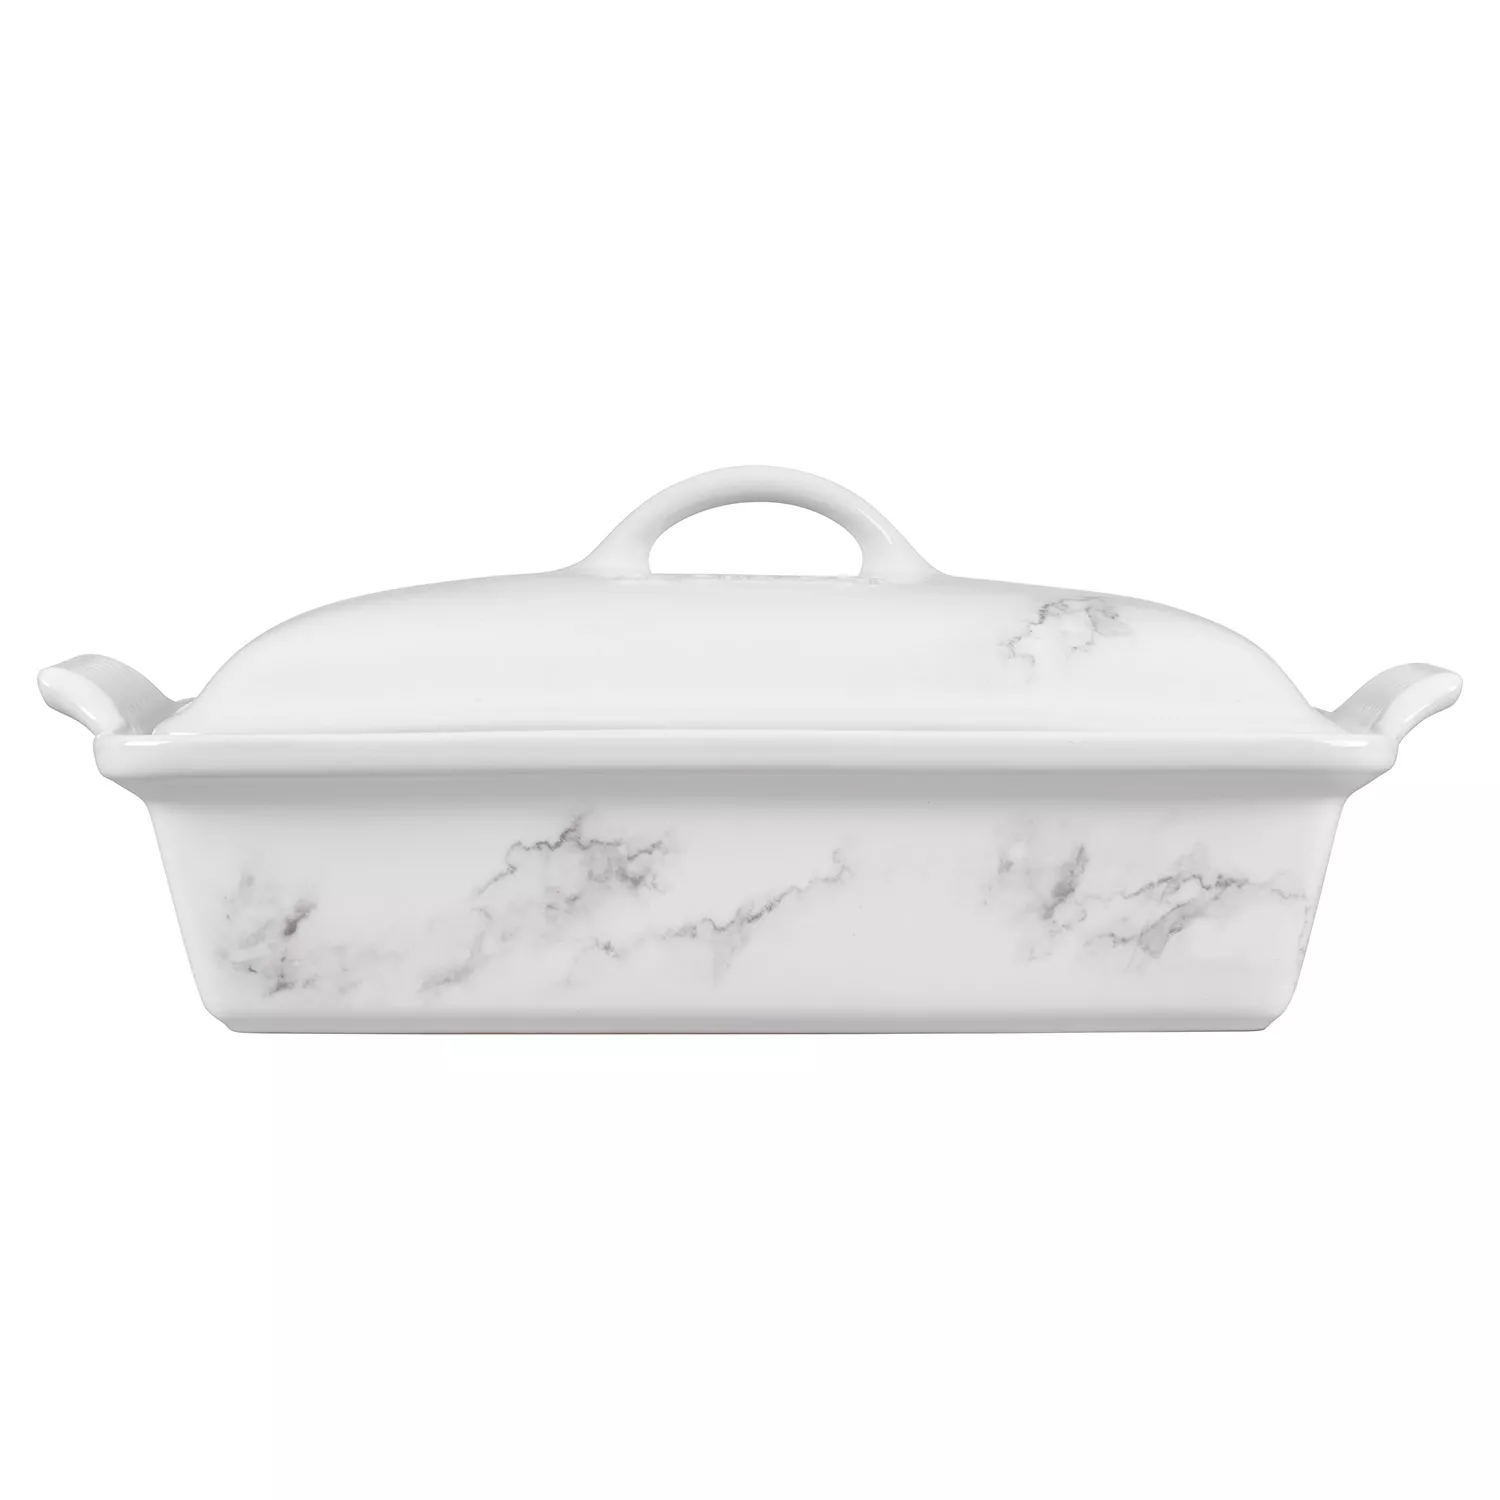 Le Creuset Heritage Marble Covered Baker, 4 qt.